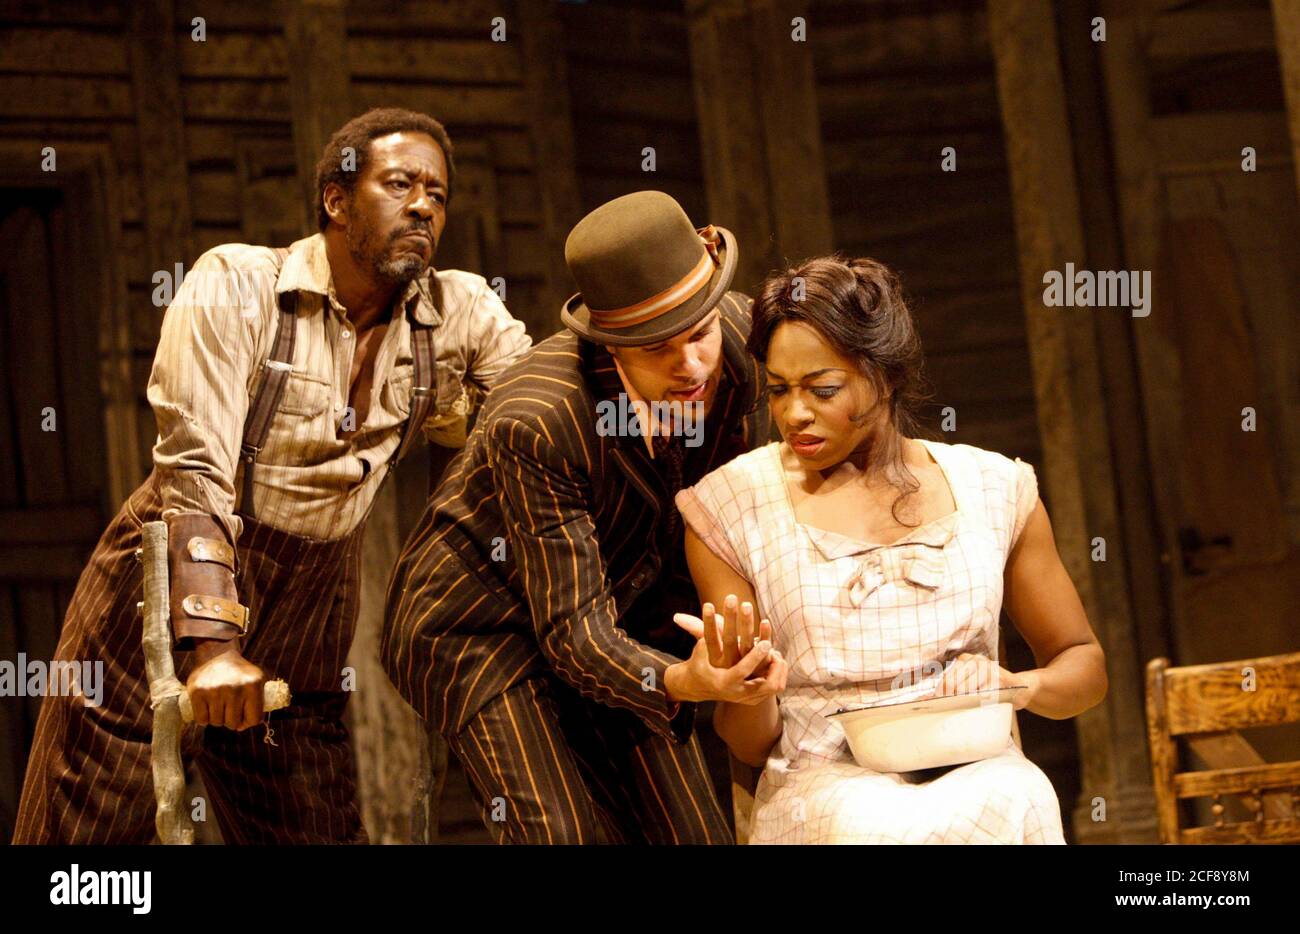 l-r: Clarke Peters (Porgy), O-T Fagbenle (Sporting Life), Nicola Hughes (Bess) in PORGY AND BESS at the Savoy Theatre, London WC2  09/11/2006  a new musical production by George Gershwin, Dubose & Dorothy Heyward and Ira Gershwin,adapted and directed by Trevor Nunn  set design: John Gunter  costume design: Sue Blane  lighting design: David Hersey  musical supervision: Gareth Valentine Stock Photo